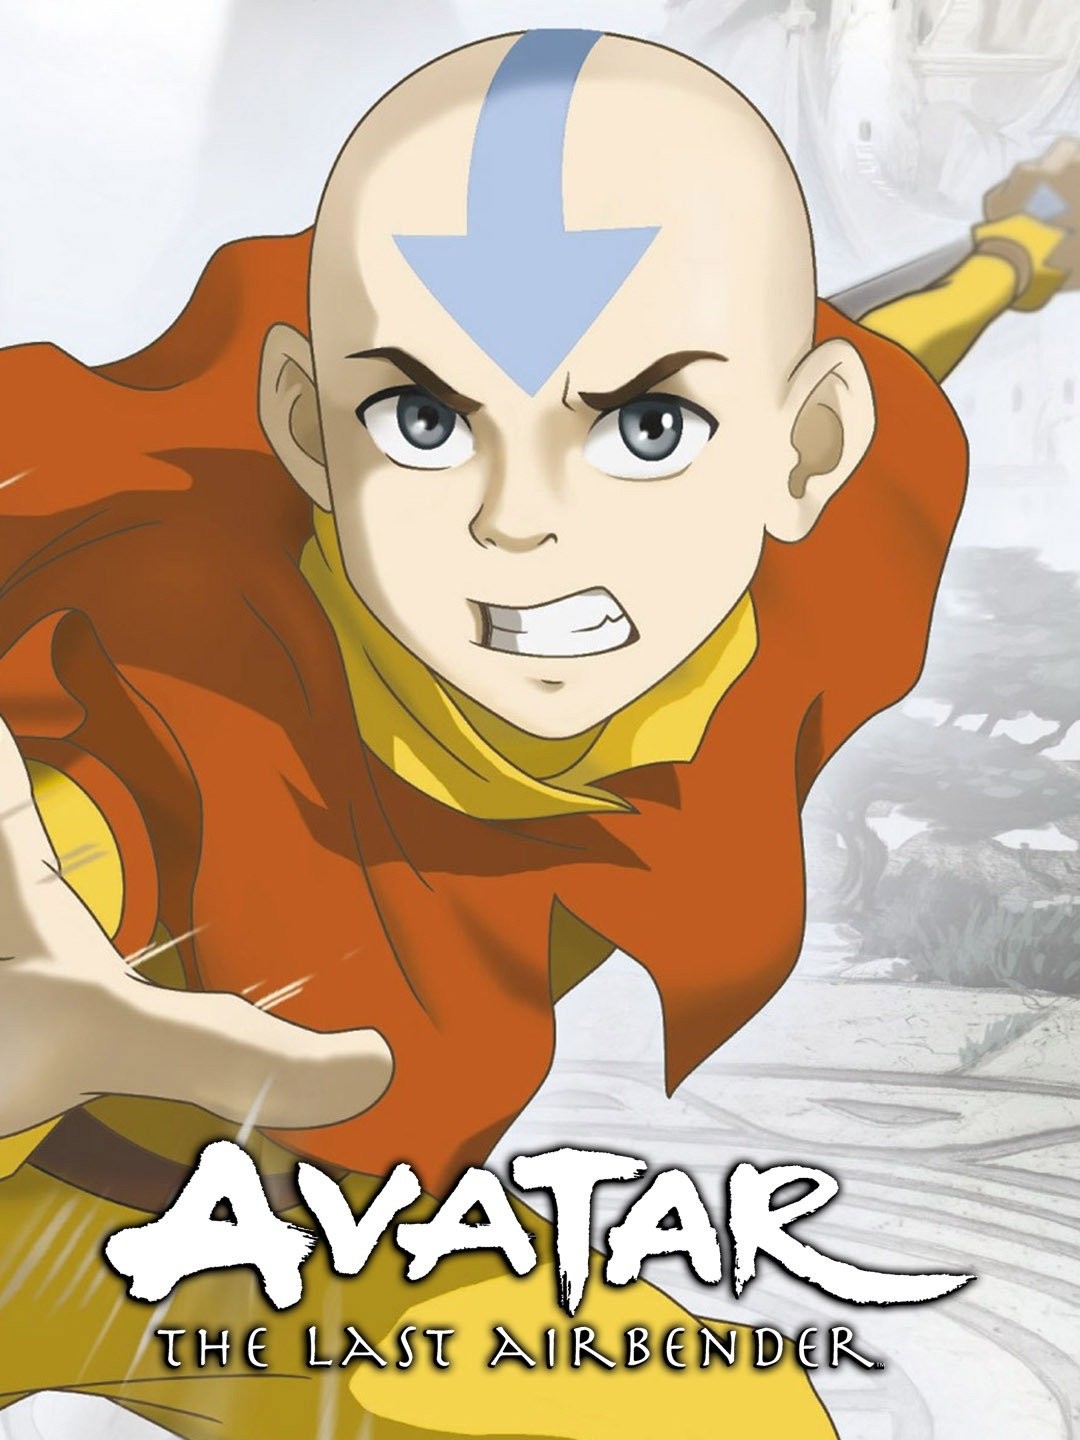 The King's Avatar Season 1 - watch episodes streaming online